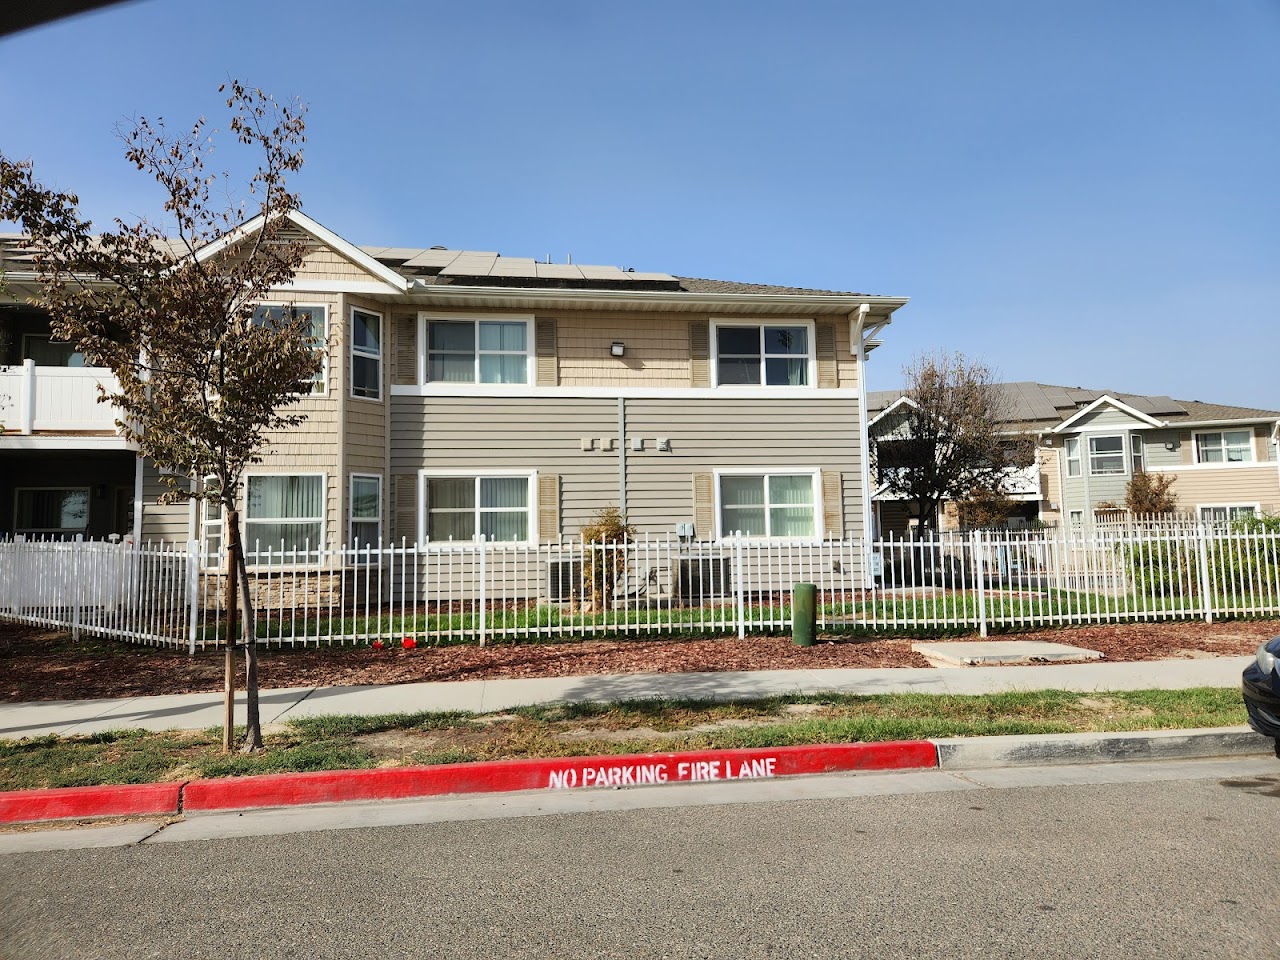 Photo of MONTGOMERY CROSSING. Affordable housing located at 1150 TAMMY LN LEMOORE, CA 93245